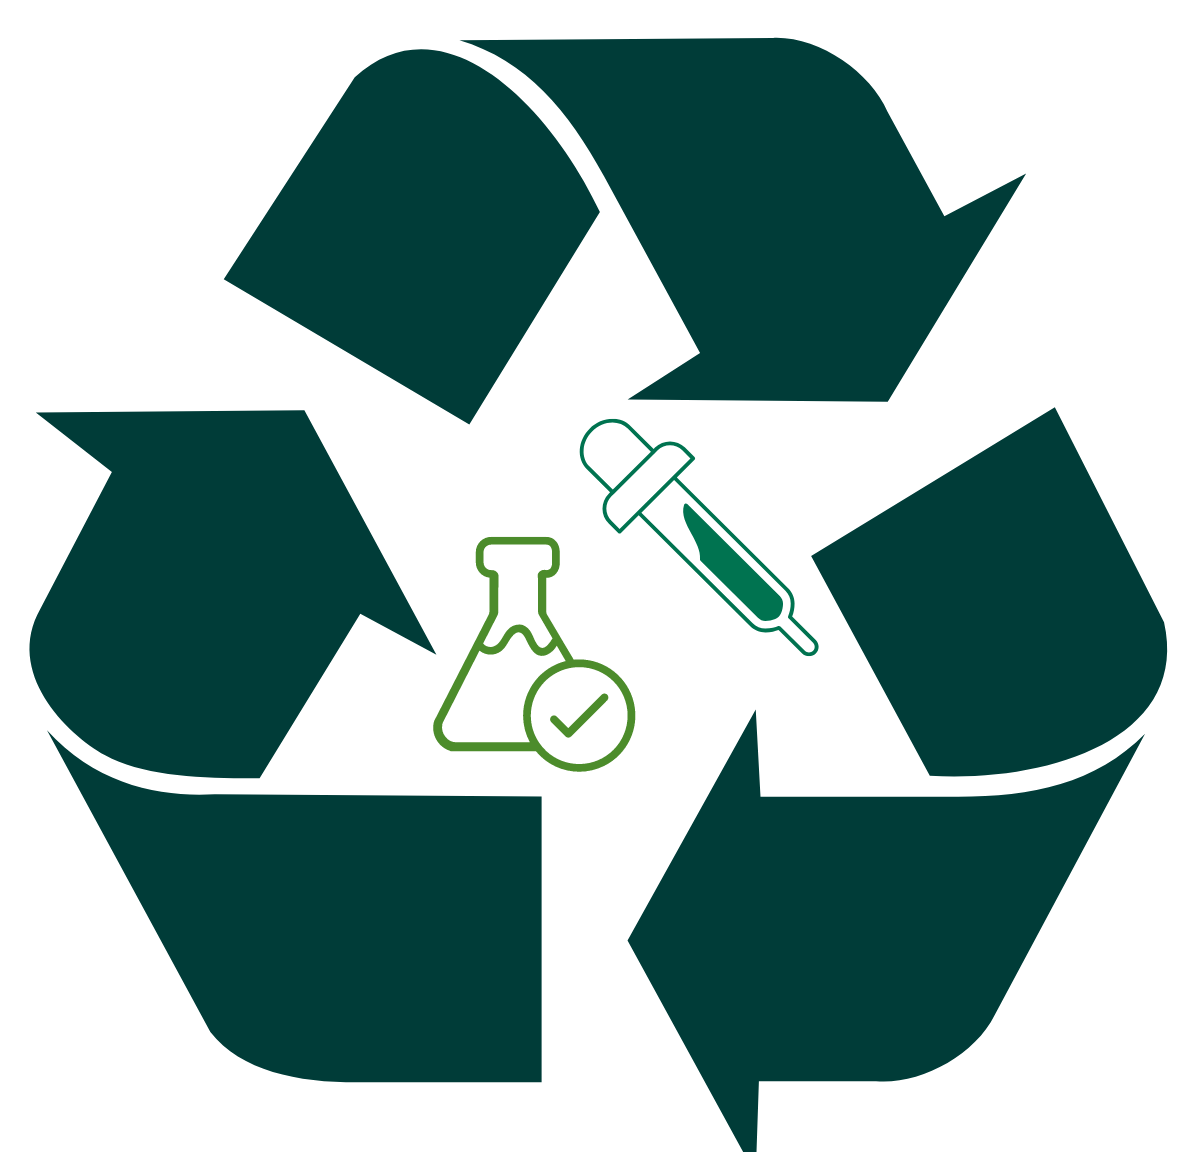 Recycle icon with lab icons in the middle like a pipette and lab bottle.